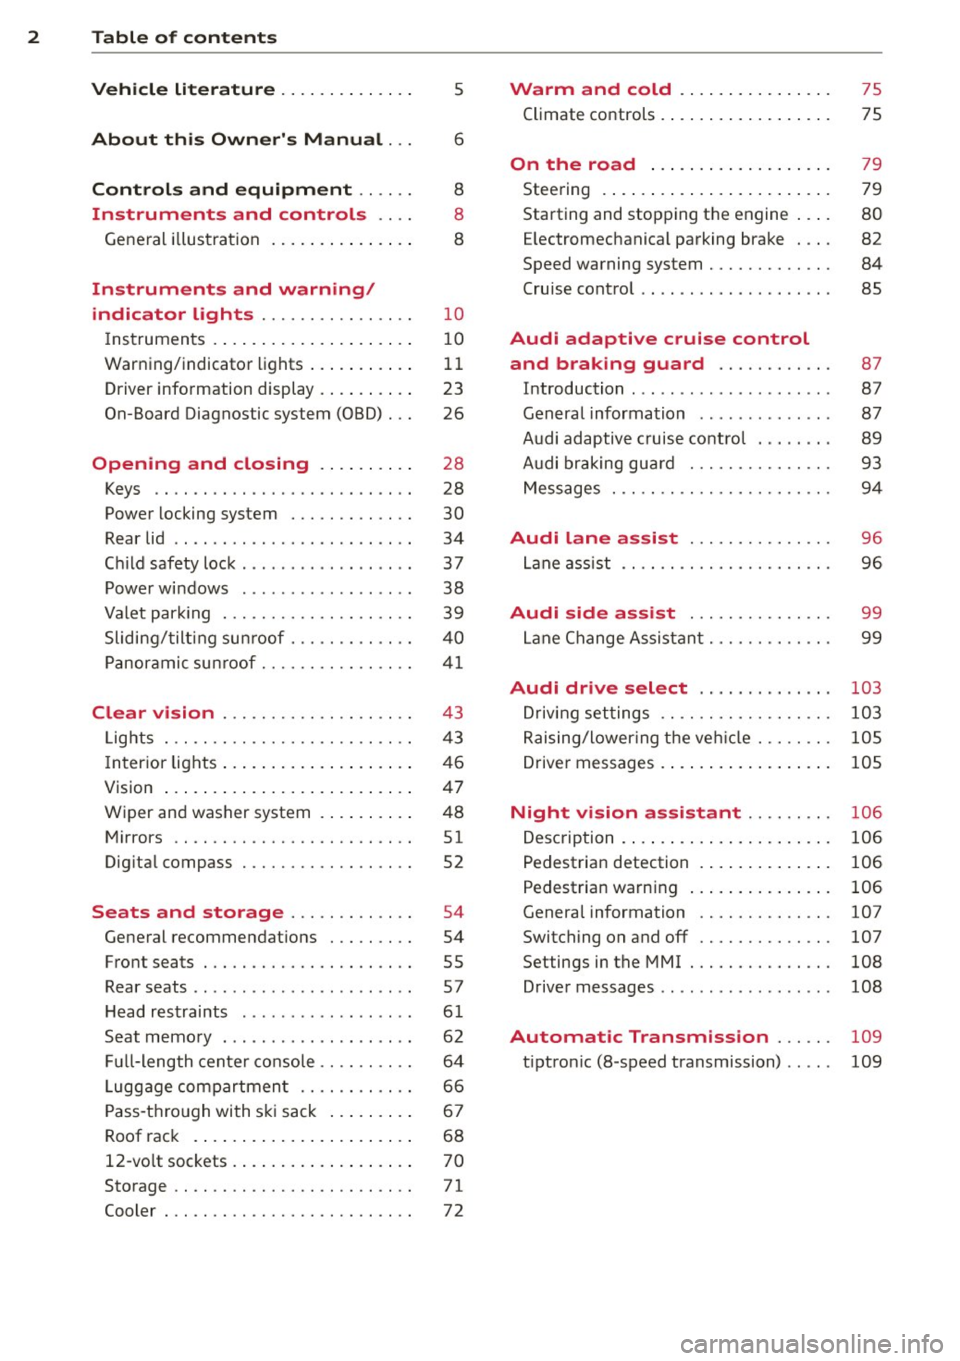 AUDI S8 2012  Owners Manual 2  Table  of  contents Vehicle  literature  .. .. .. .. .. ... . 
5 
About  this  Owners  Manual . . . 6 
Controls  and equipment  .. ...  . 
Instruments  and  controls  .. . . 
General  illustration